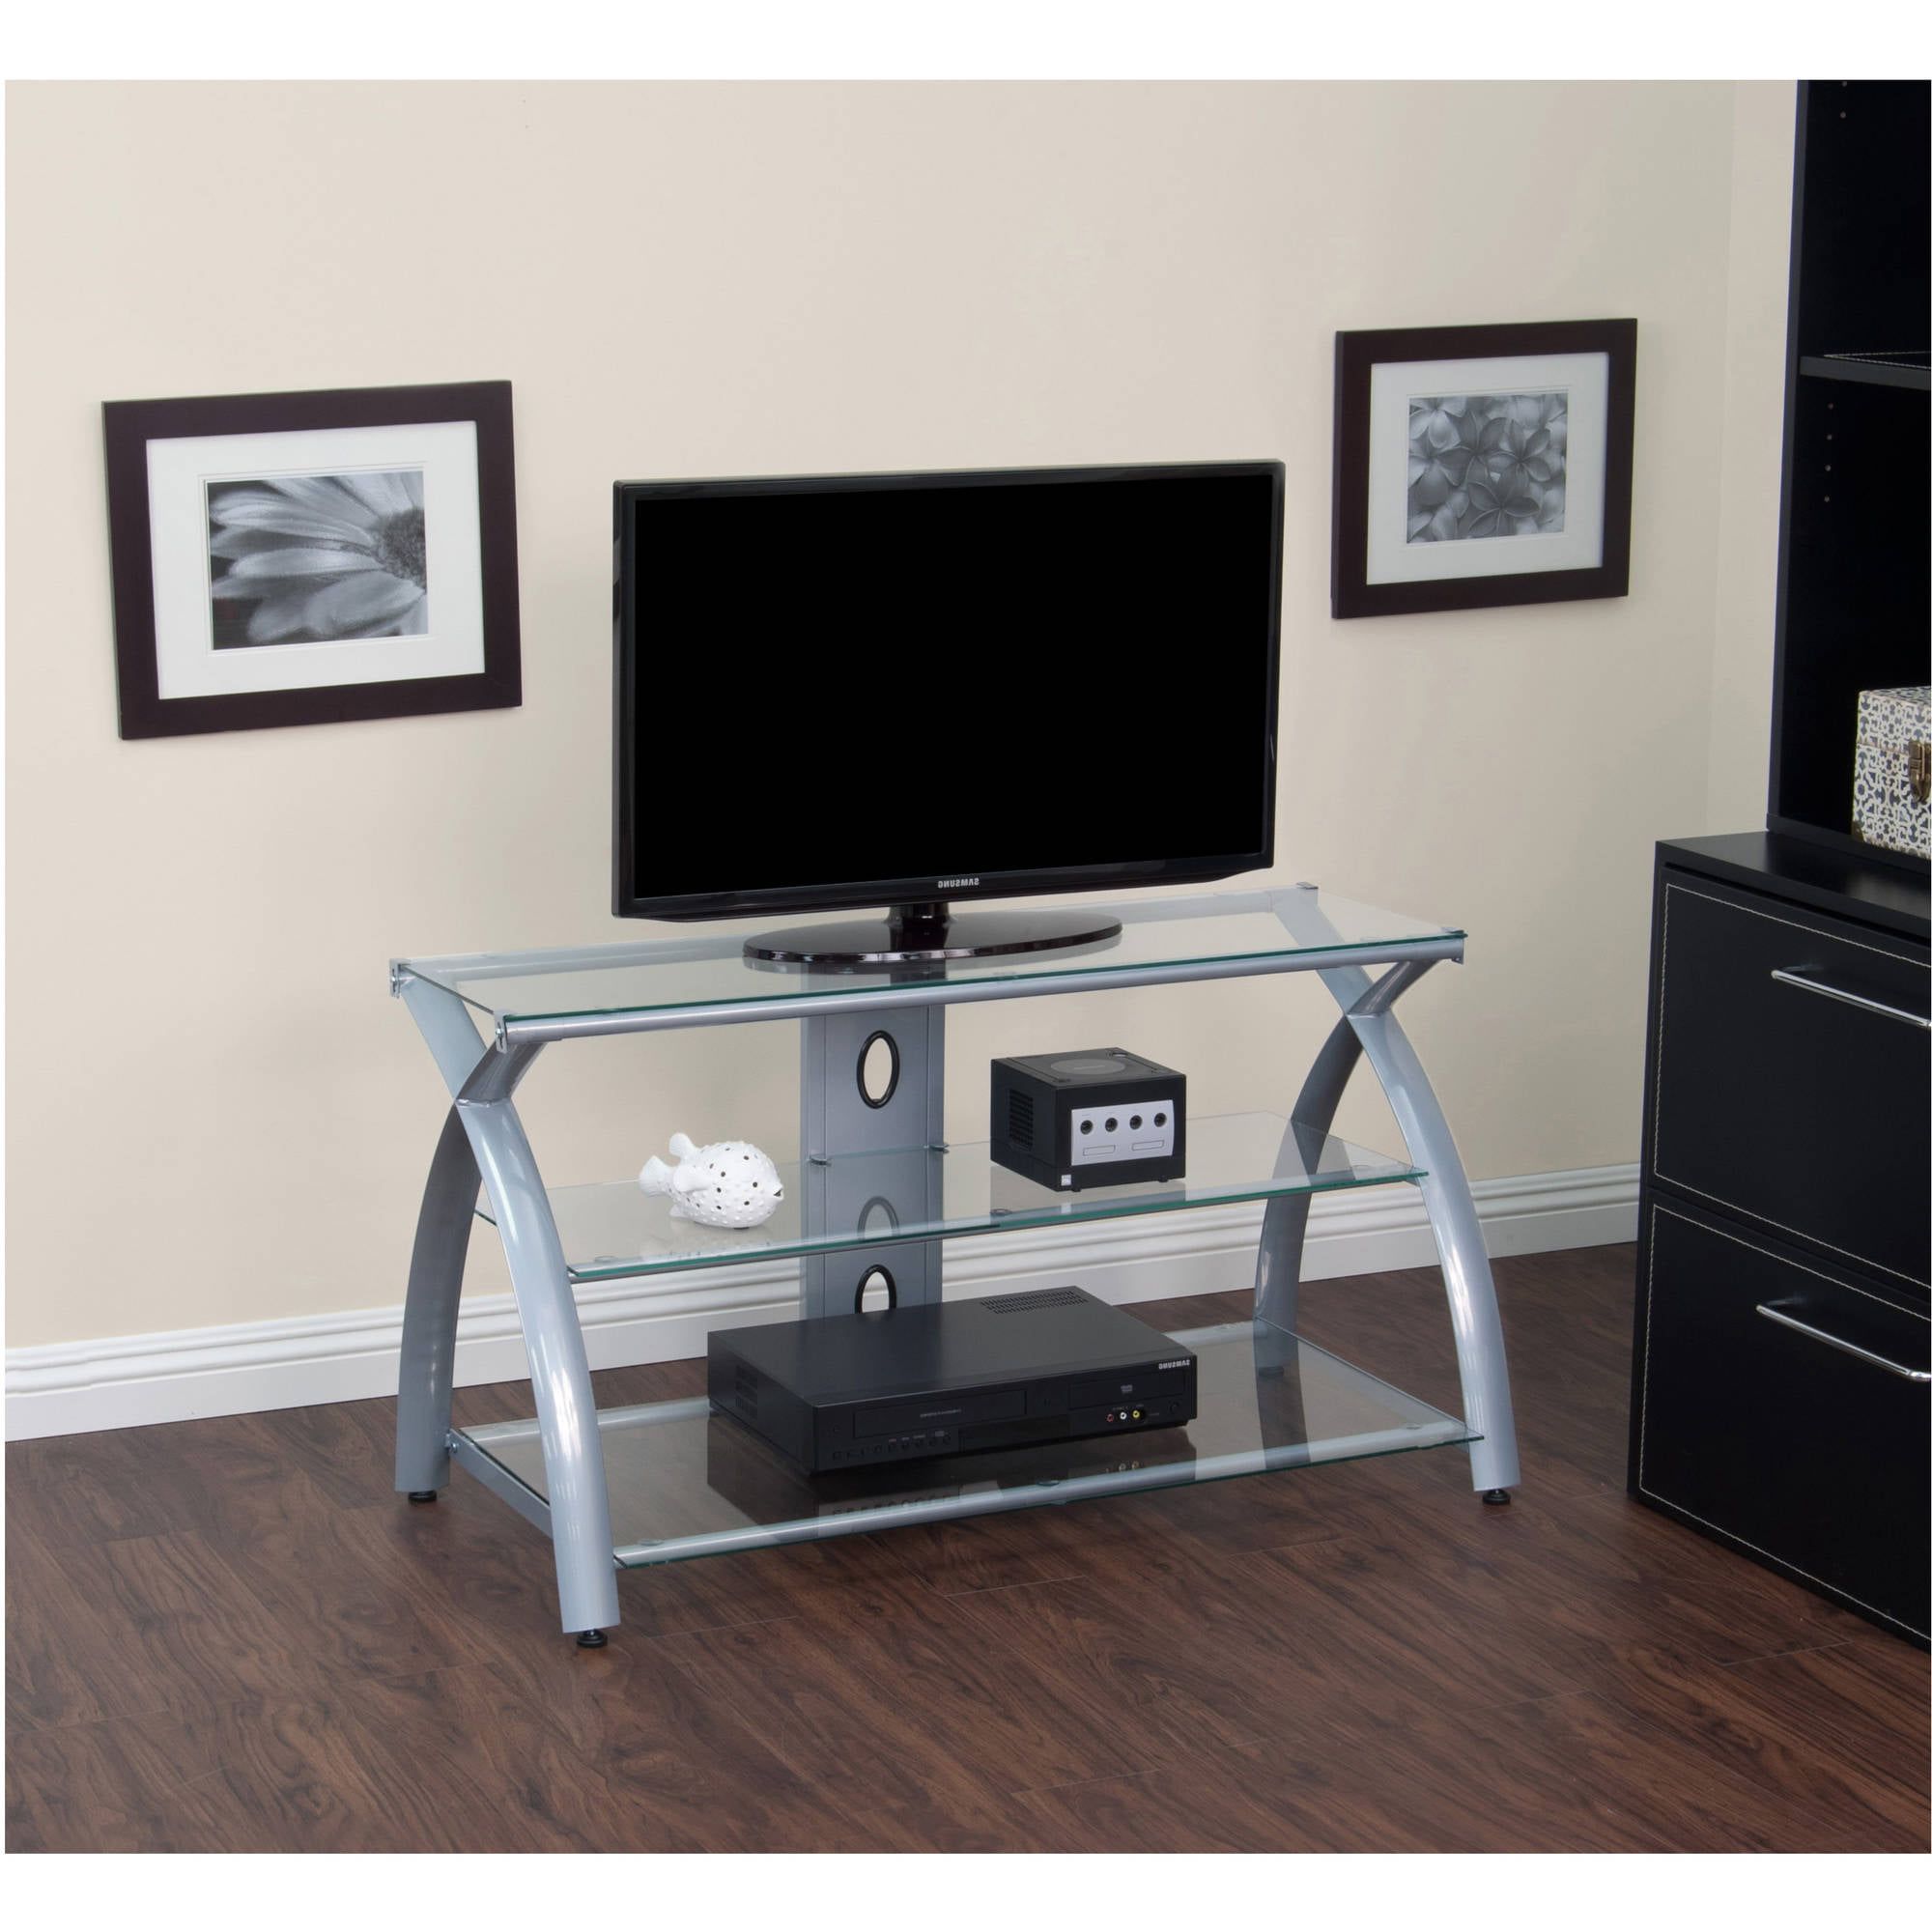 Widely Used Glass Shelves Tv Stands Pertaining To Calico Designs Futura 42" Wide 3 Shelf Tv Stand In Silver / Clear Glass (View 9 of 15)